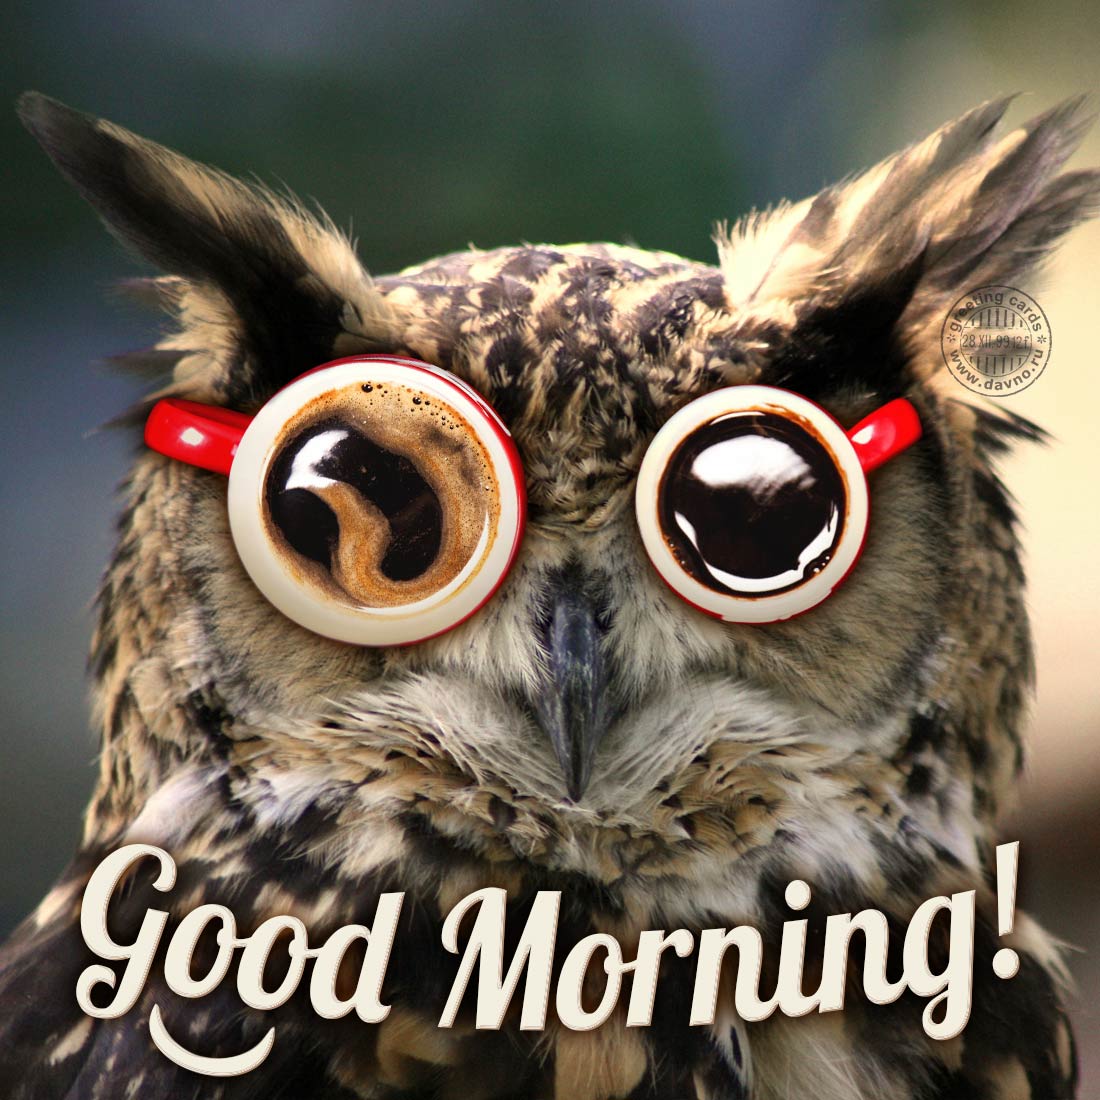 Funny Good Morning Owl Picture - Download on Davno1100 x 1100